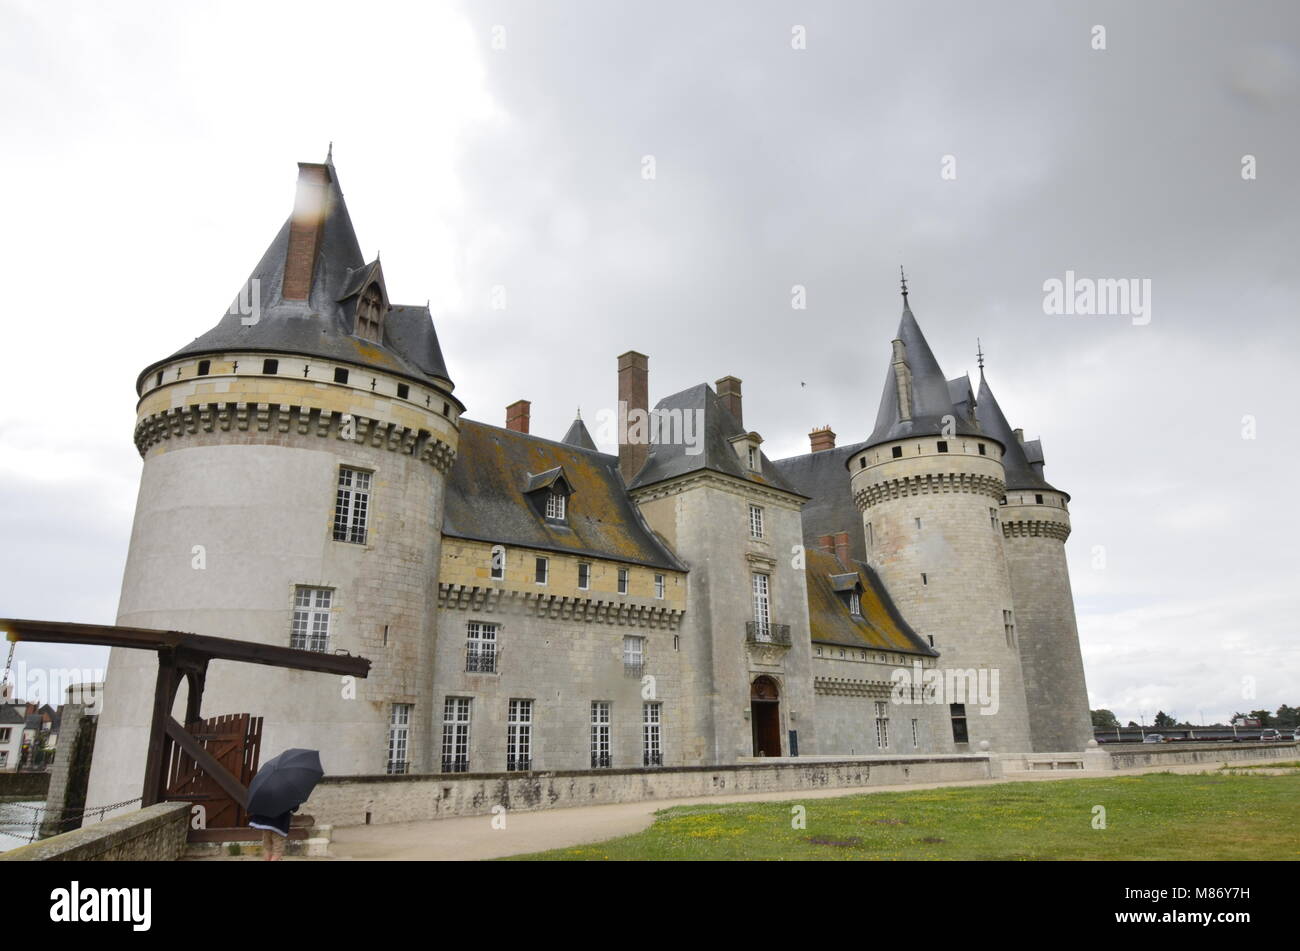 Castle of Sully-sur-Loire, Loire region, France. Snap of 30 June 2017 17:38. Shooting from the park towards the castle entrance. The façade is mirrore Stock Photo